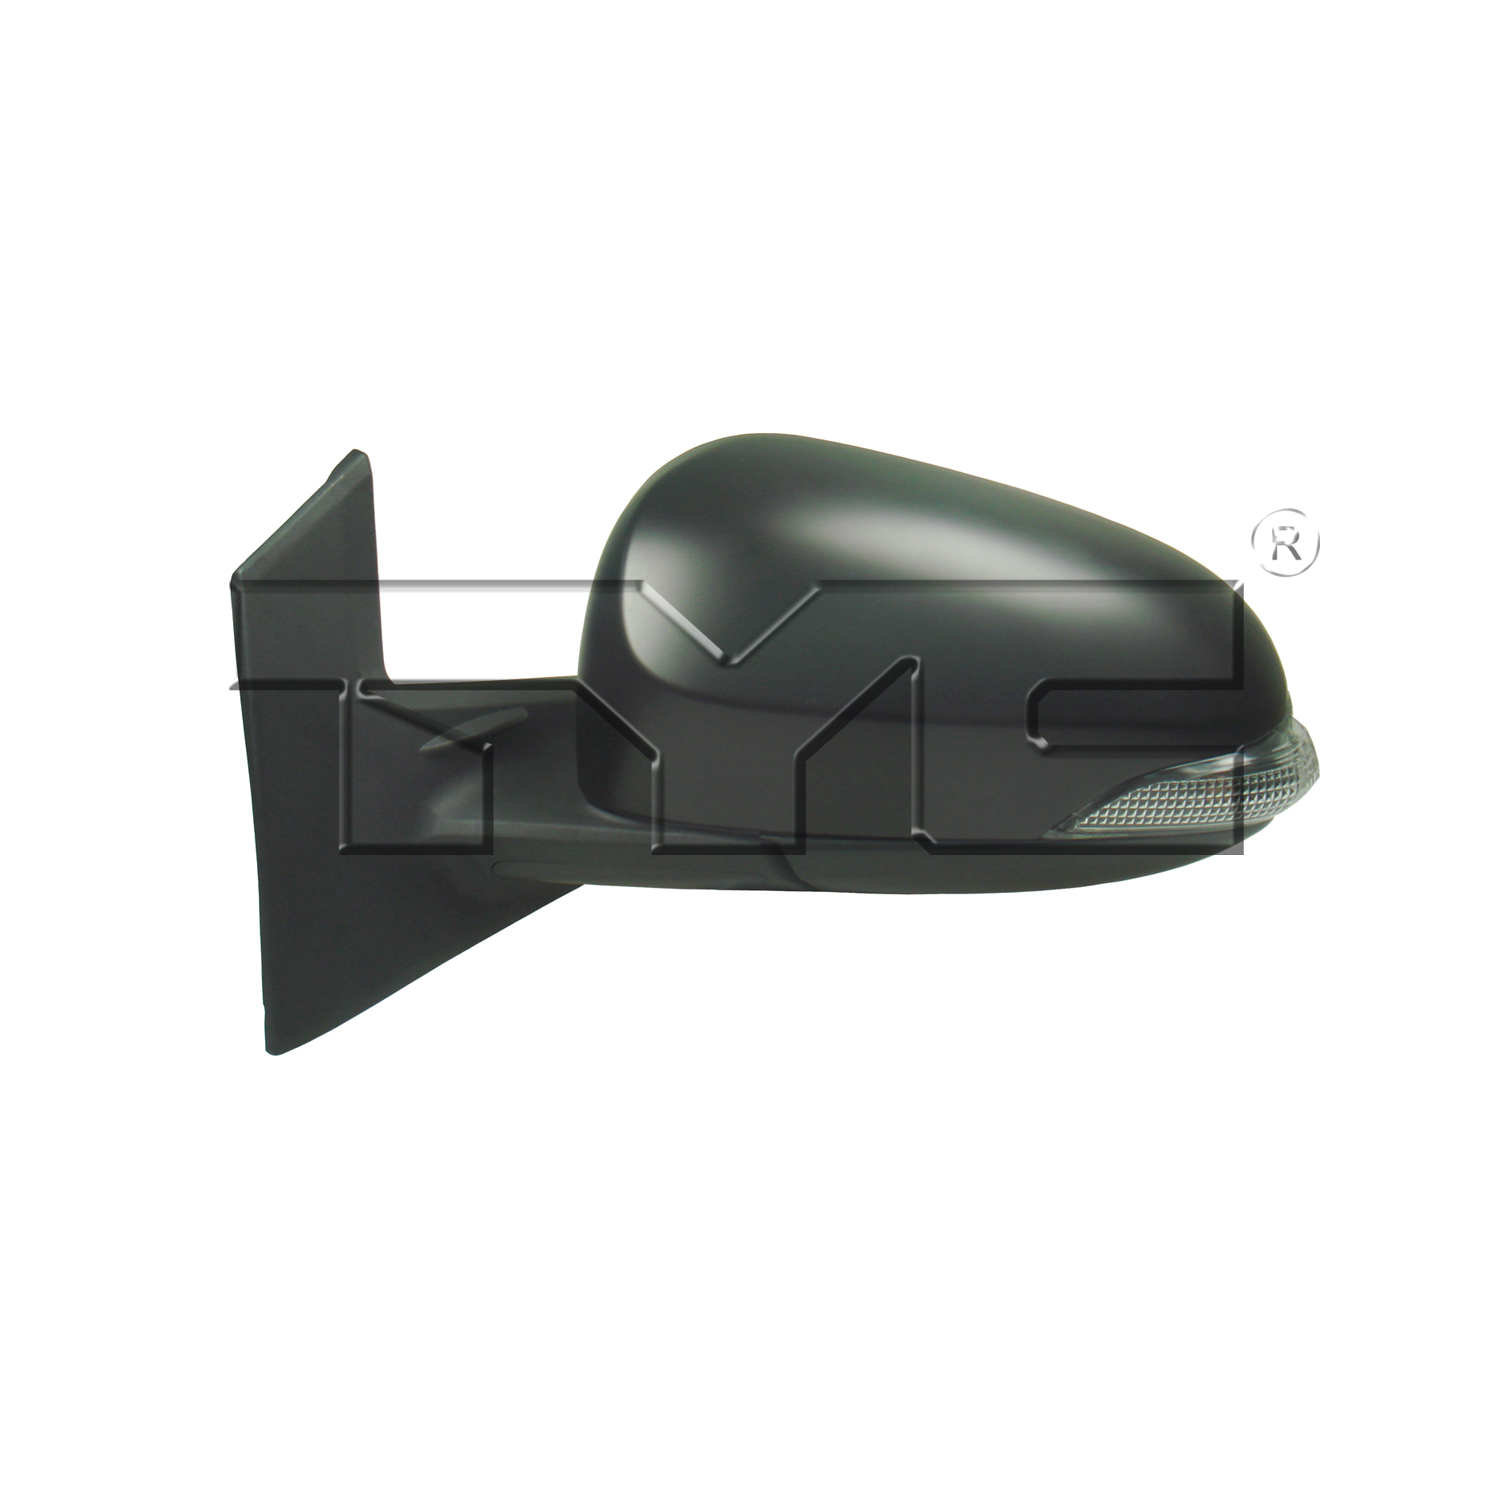 Aftermarket MIRRORS for TOYOTA - PRIUS C, PRIUS c,12-19,LT Mirror outside rear view